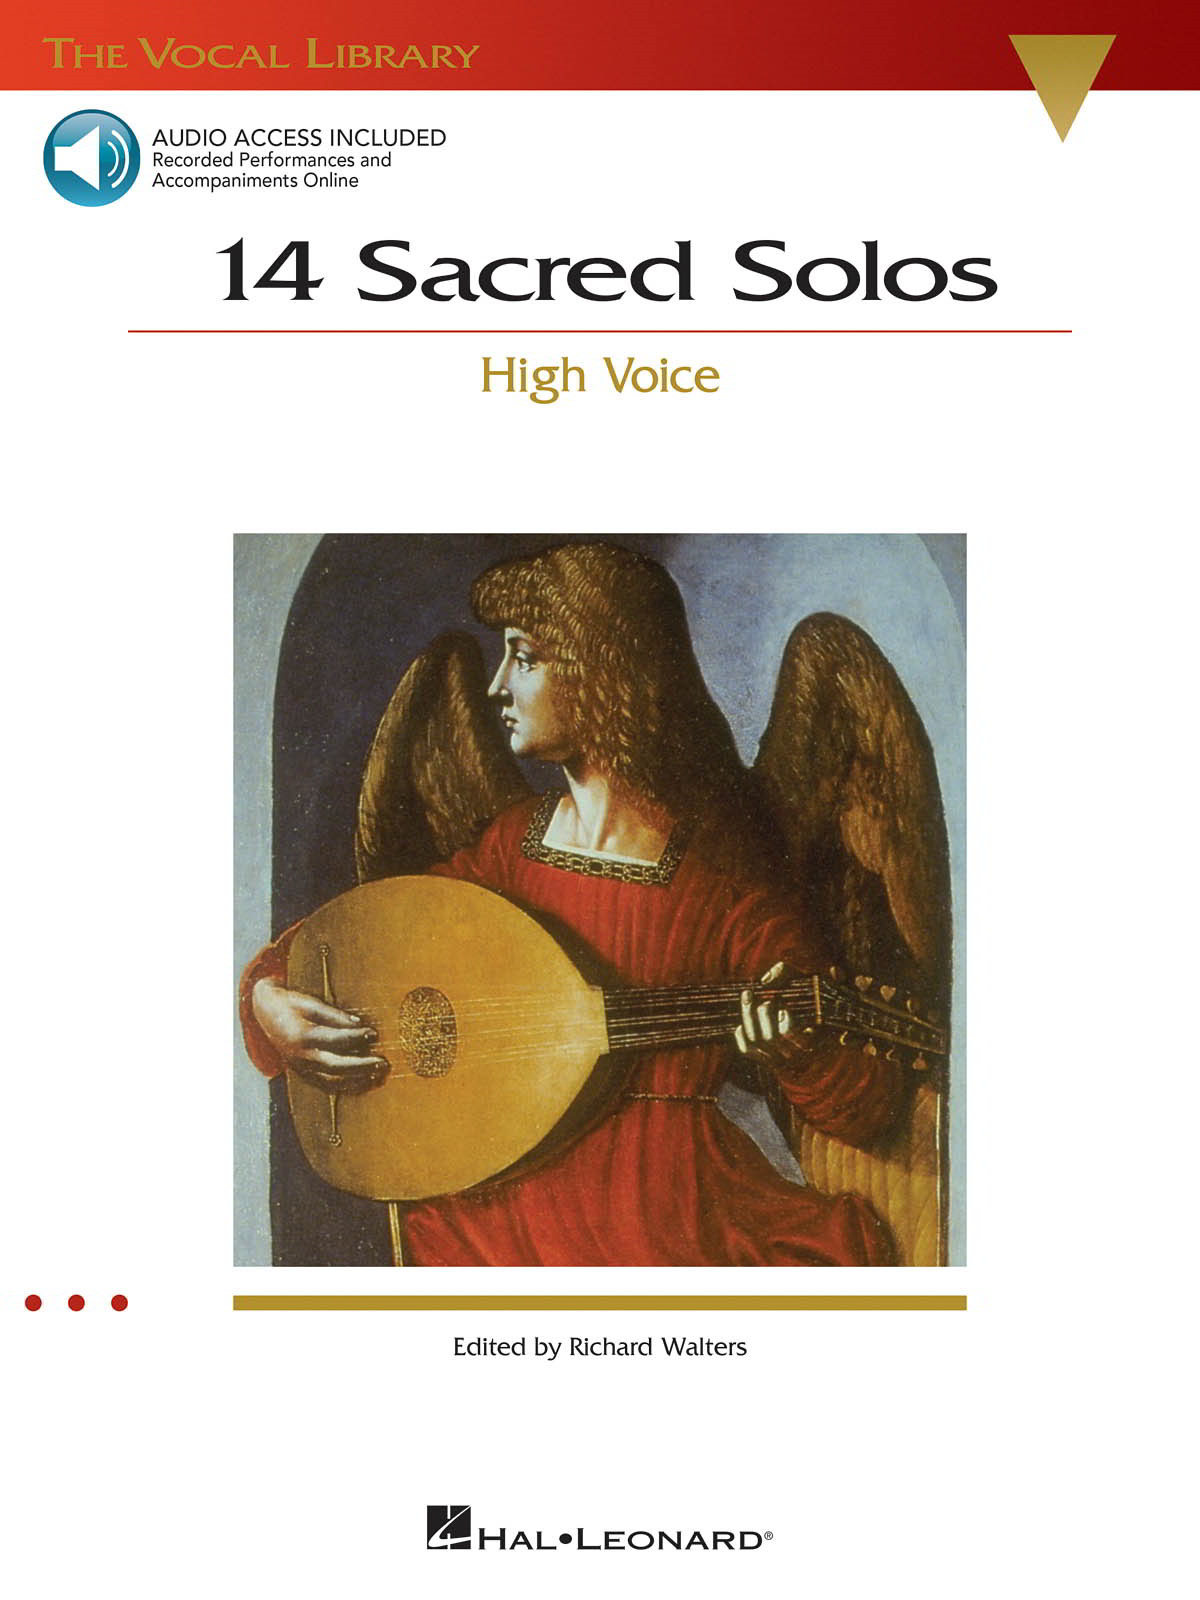 14 Sacred Classics - High Voice published by Hal Leonard (Book/Online Audio)